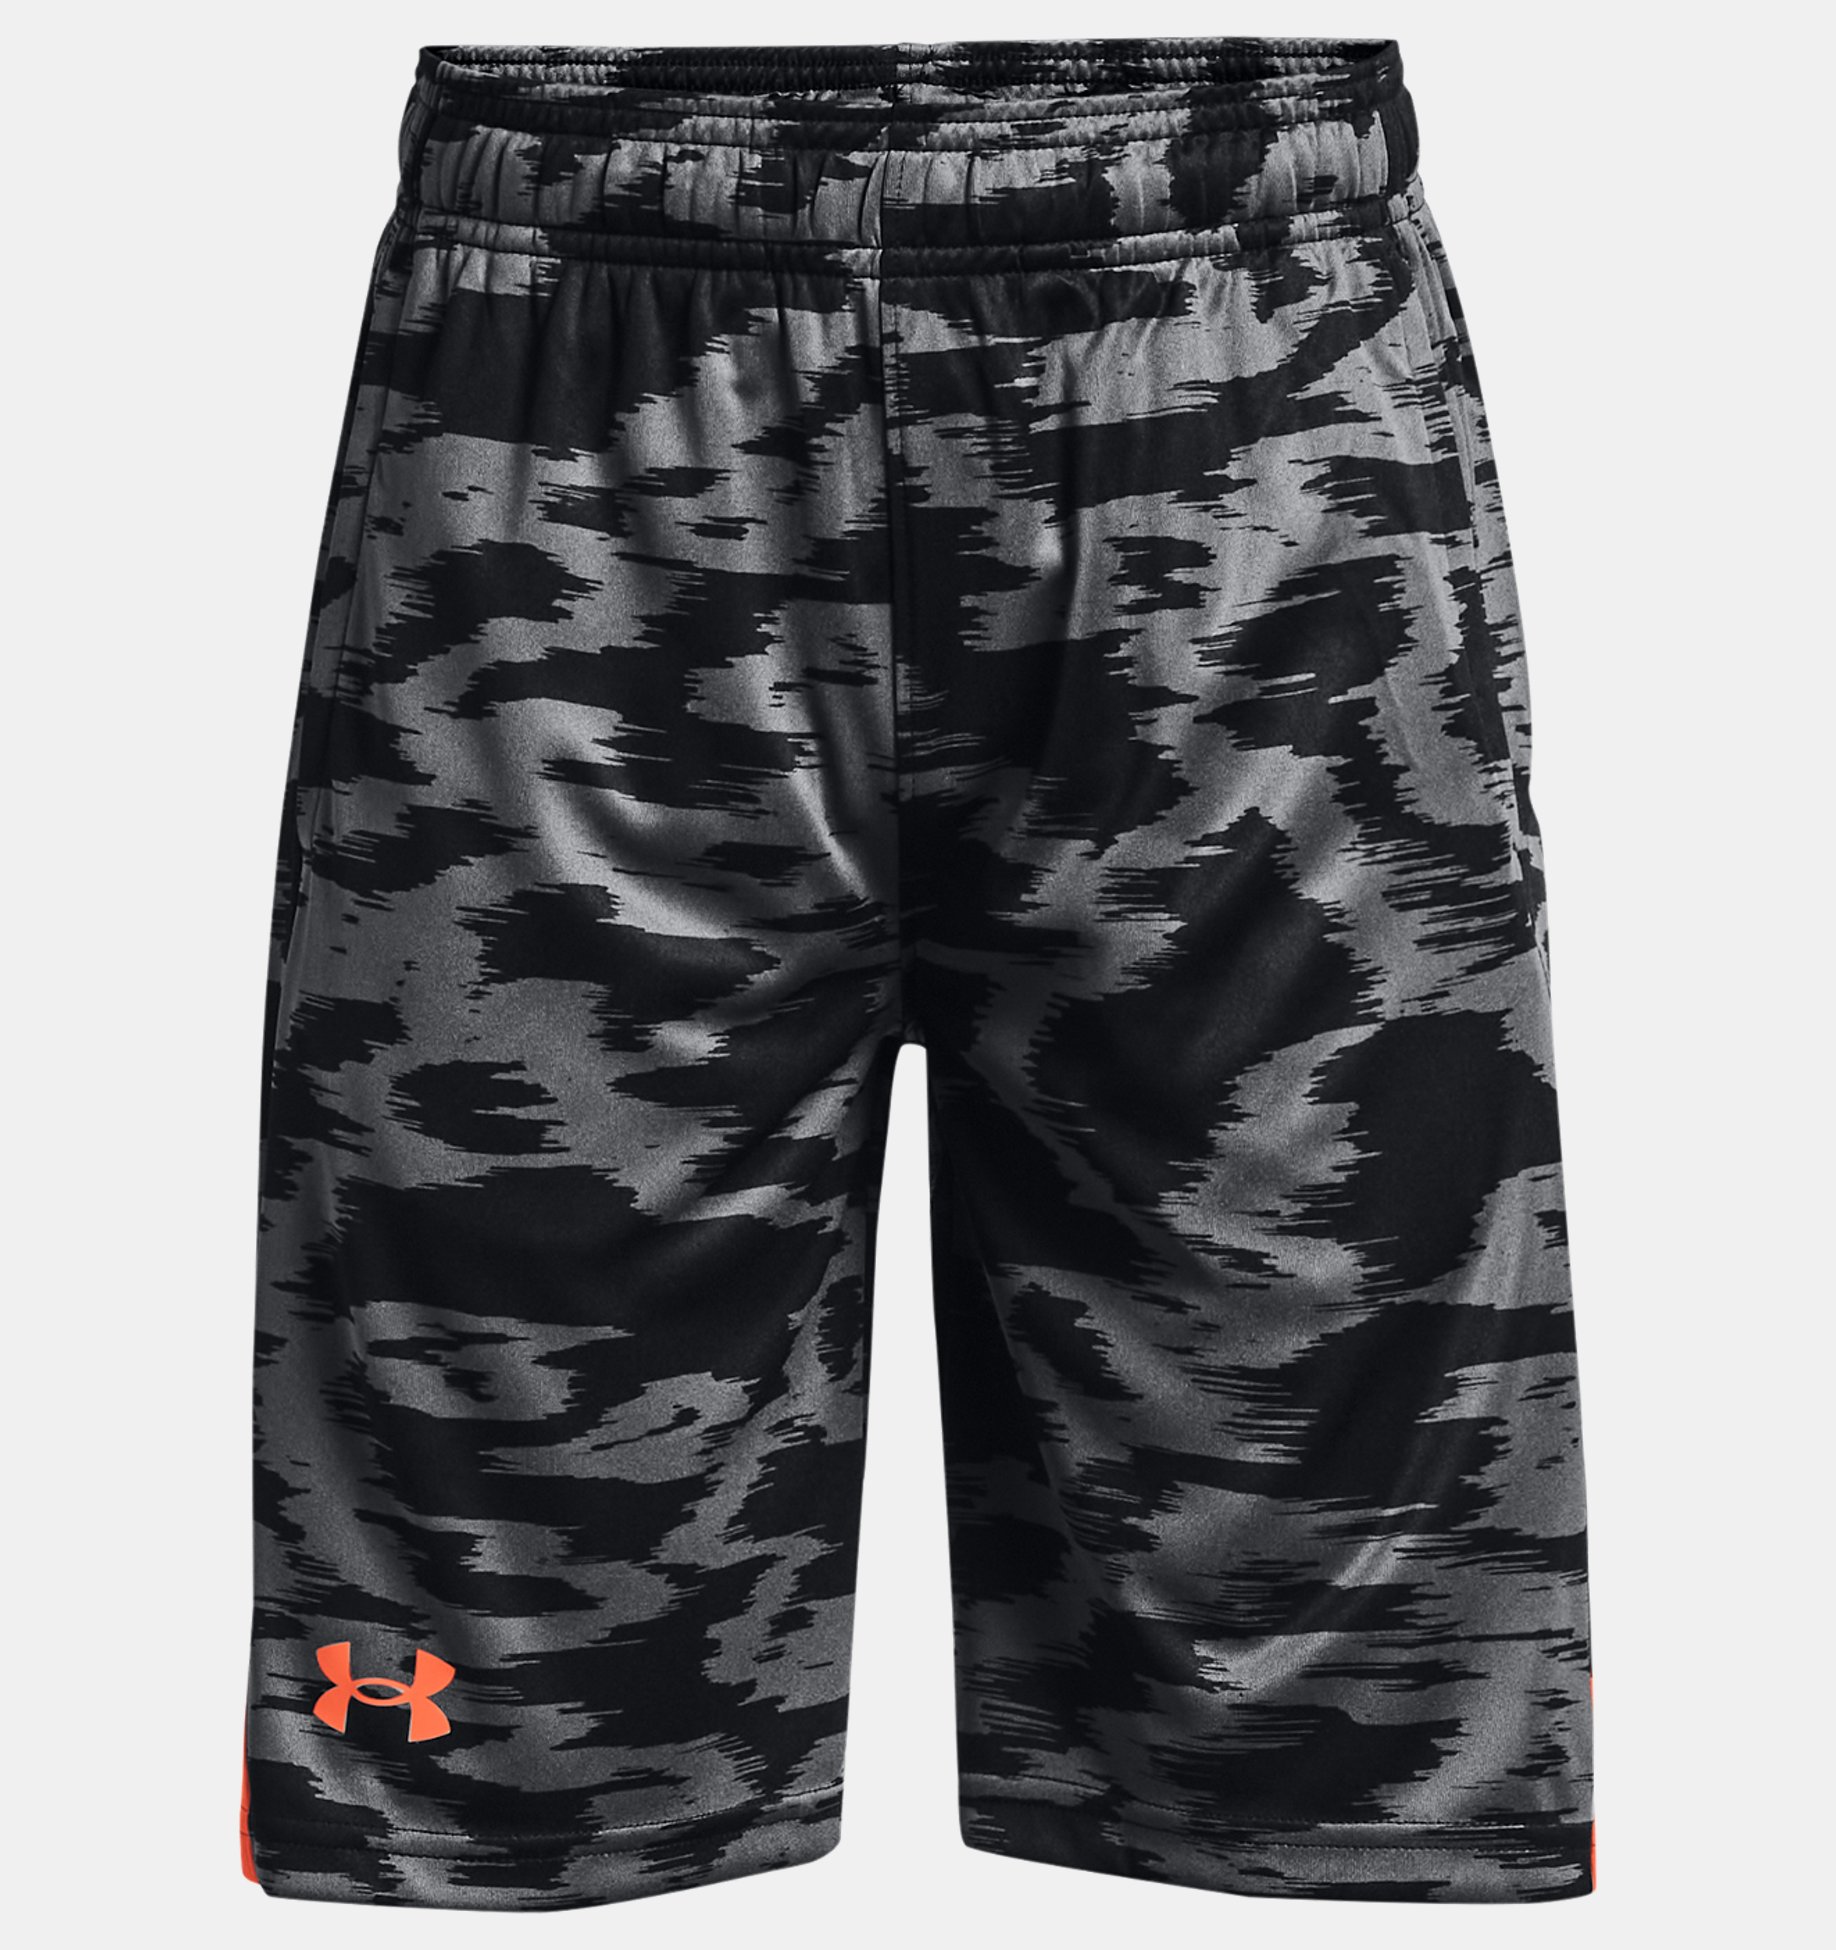 Under Armour Special Offers Sale: Extra 30% off Women's & Boys Short Styles